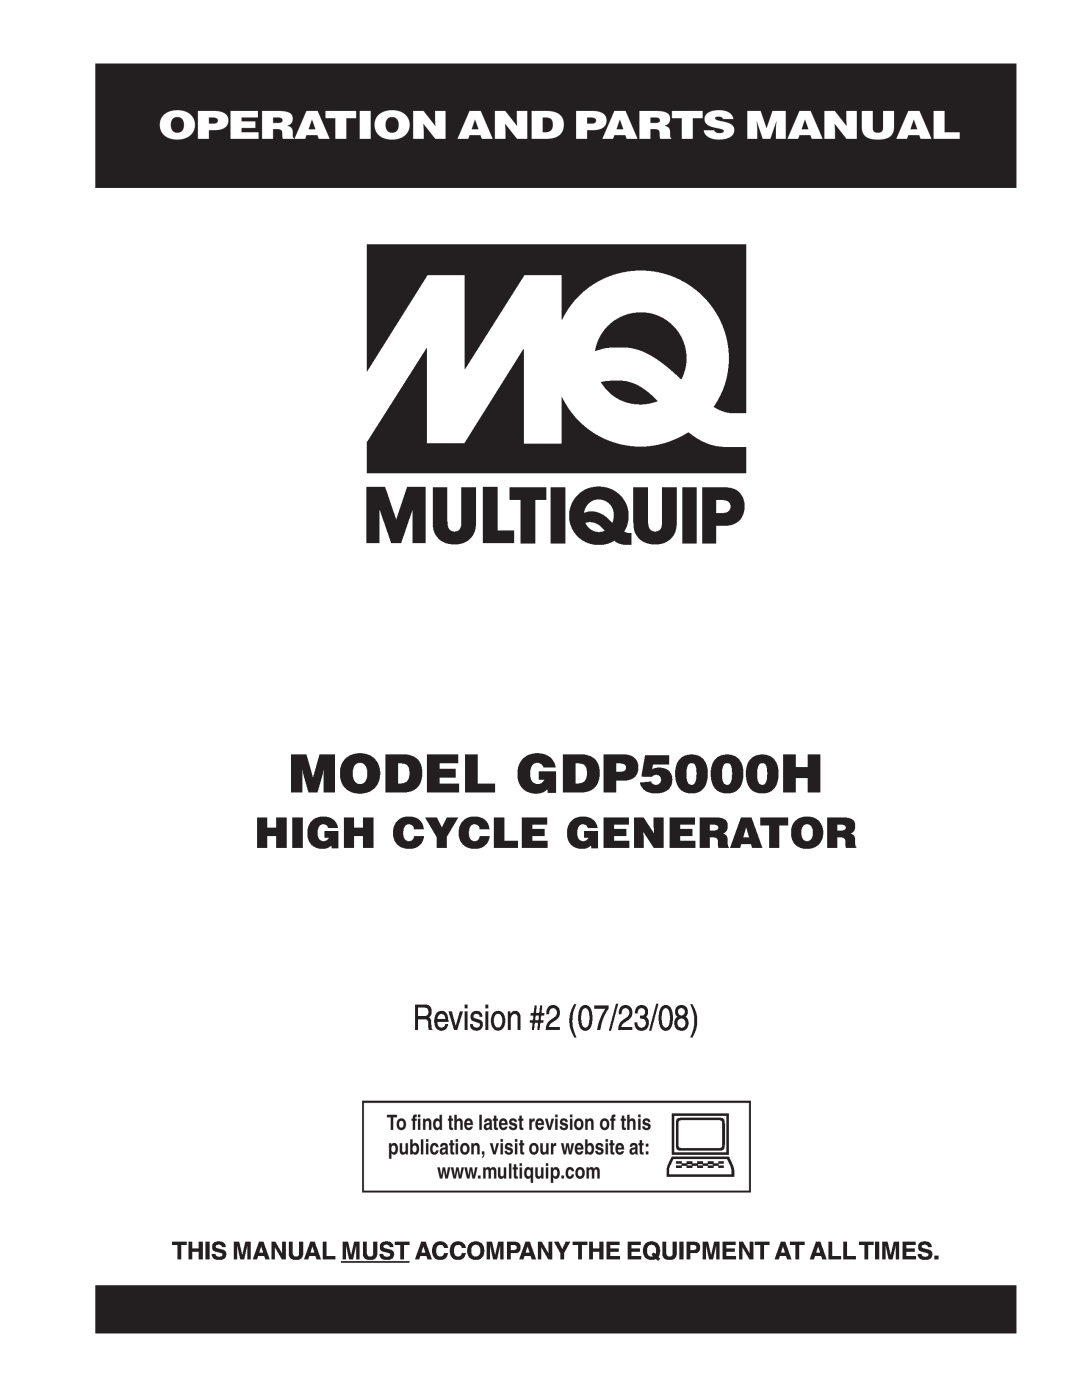 Multiquip GBP5000H manual Operation And Parts Manual, MODEL GDP5000H, High Cycle Generator, Revision #2 07/23/08 